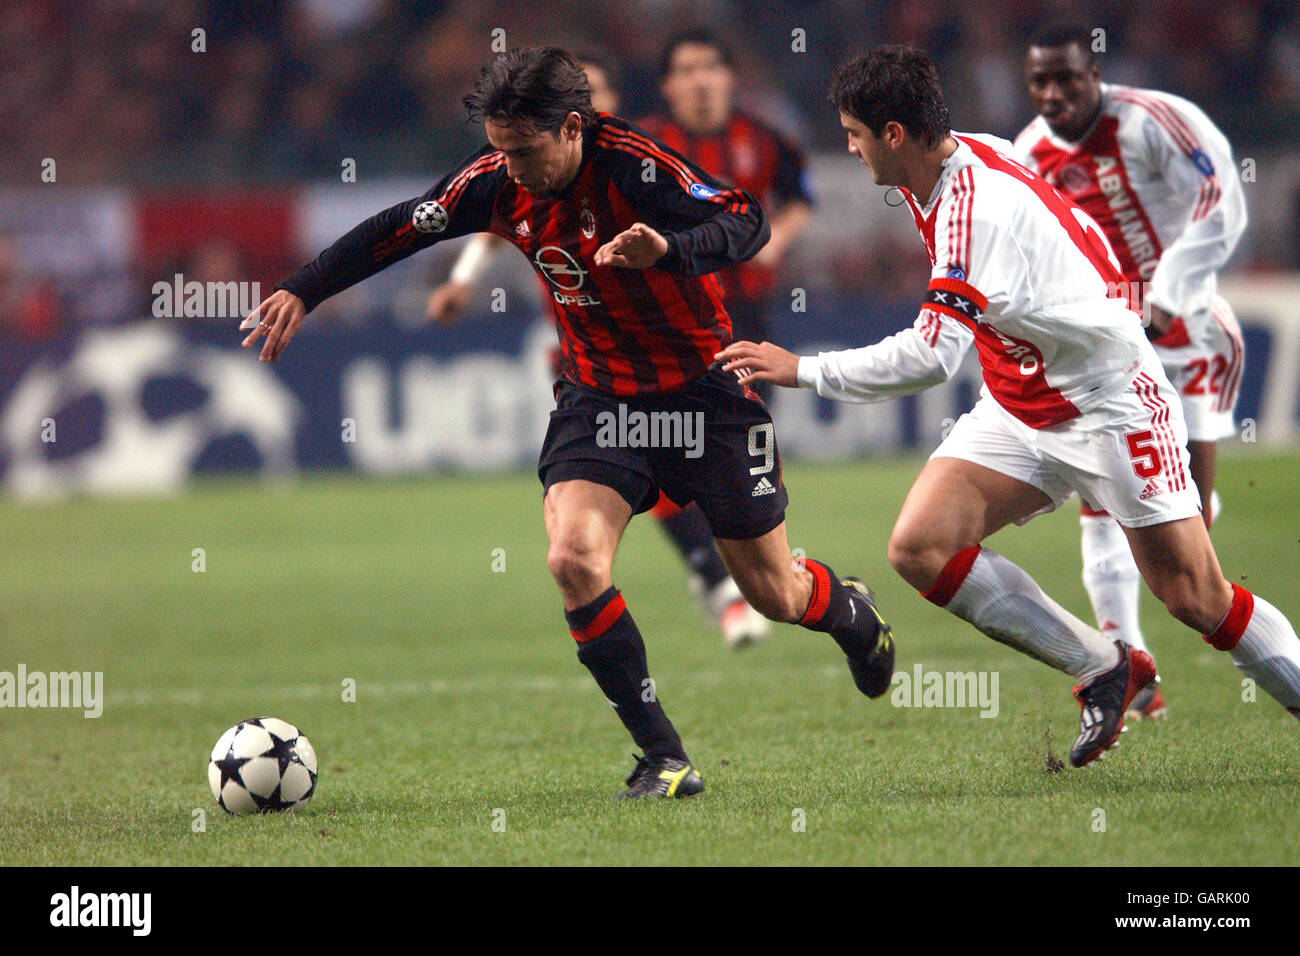 (L-R) AC Milan's Filippo Inzaghi and Ajax's Cristian Chivu battle for the ball Stock Photo